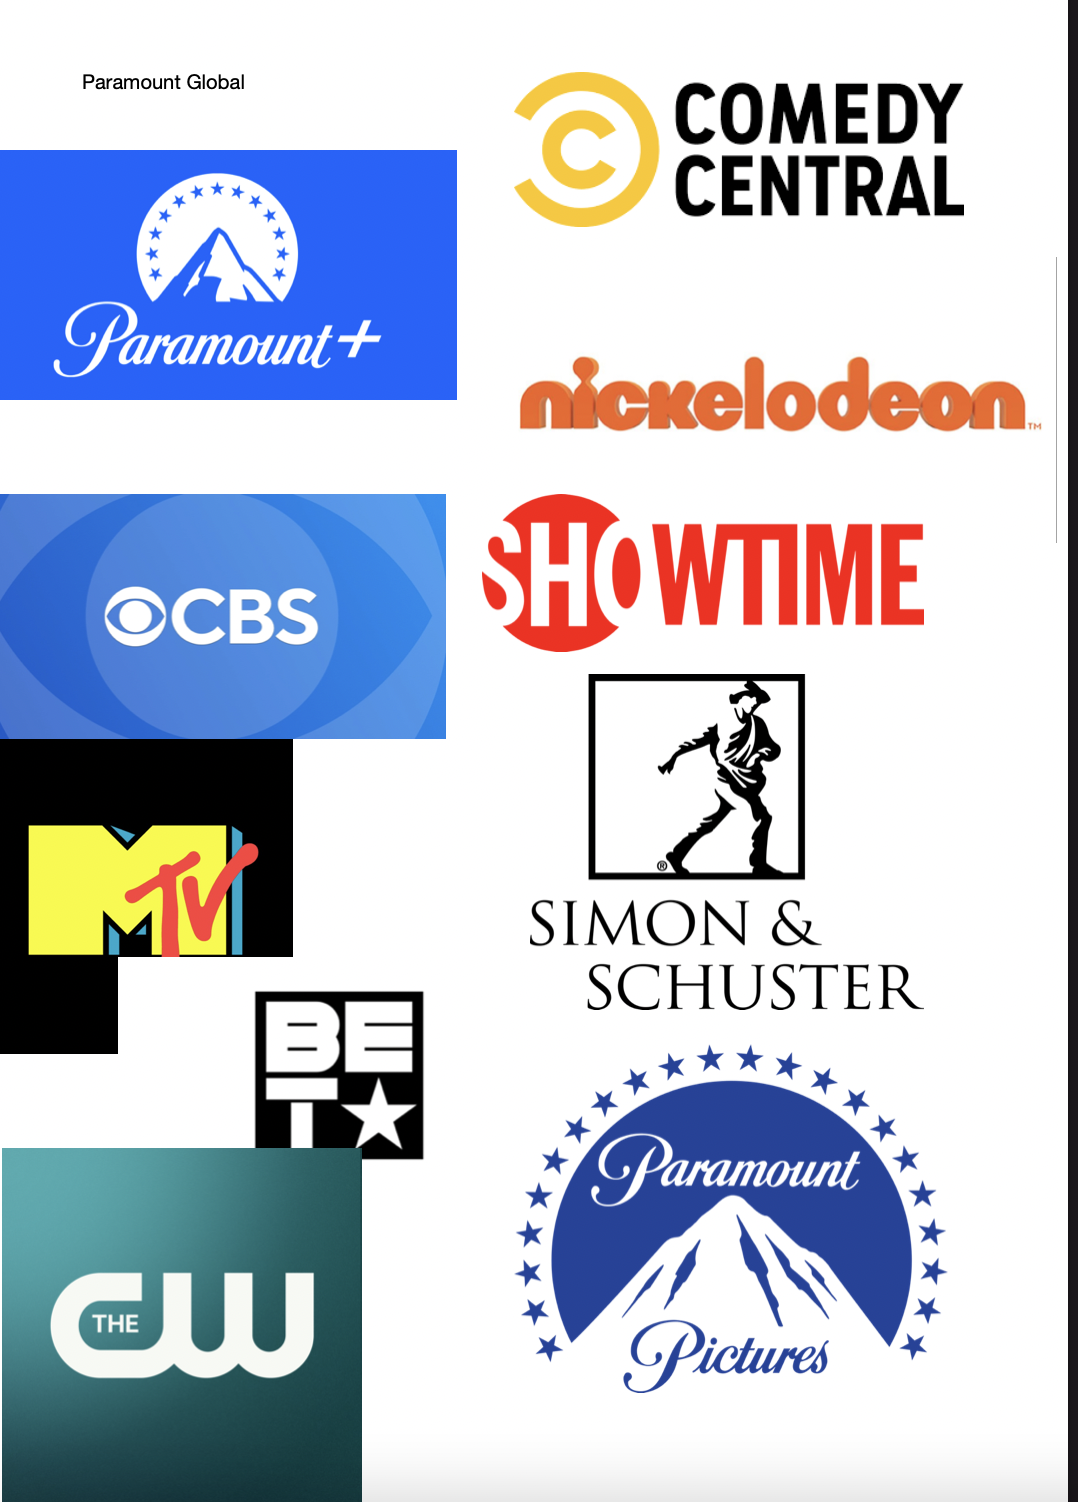 <p>CBS, Showtime, Simon &amp; Schuster,</p><p>Paramount Pictures, BET, Comedy Central, MTV, Nickelodeon</p><p>Paramount+</p><p>CW (joint venture with Nexstar)</p>